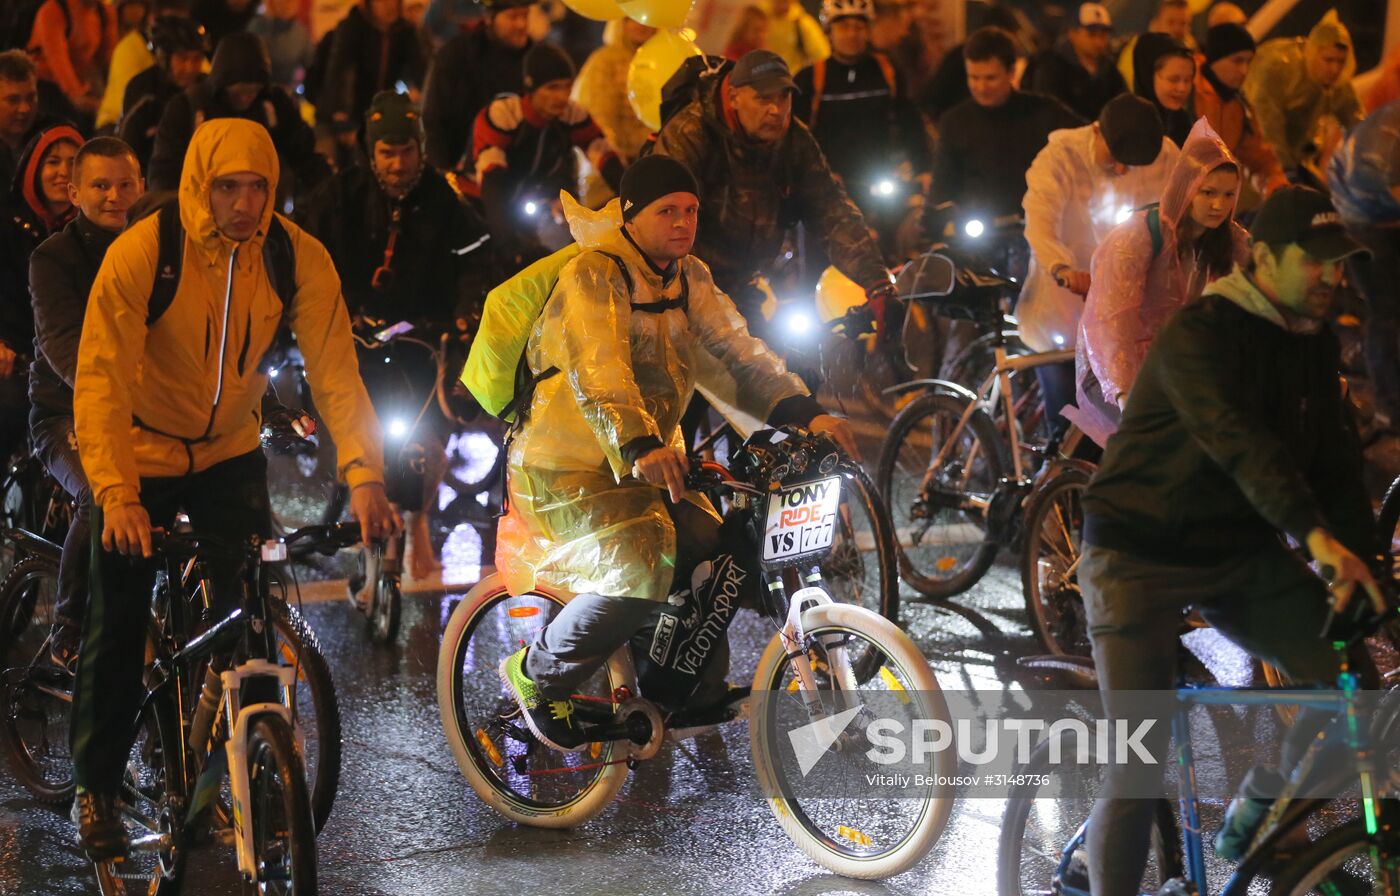 Third night time cycle parade in Moscow